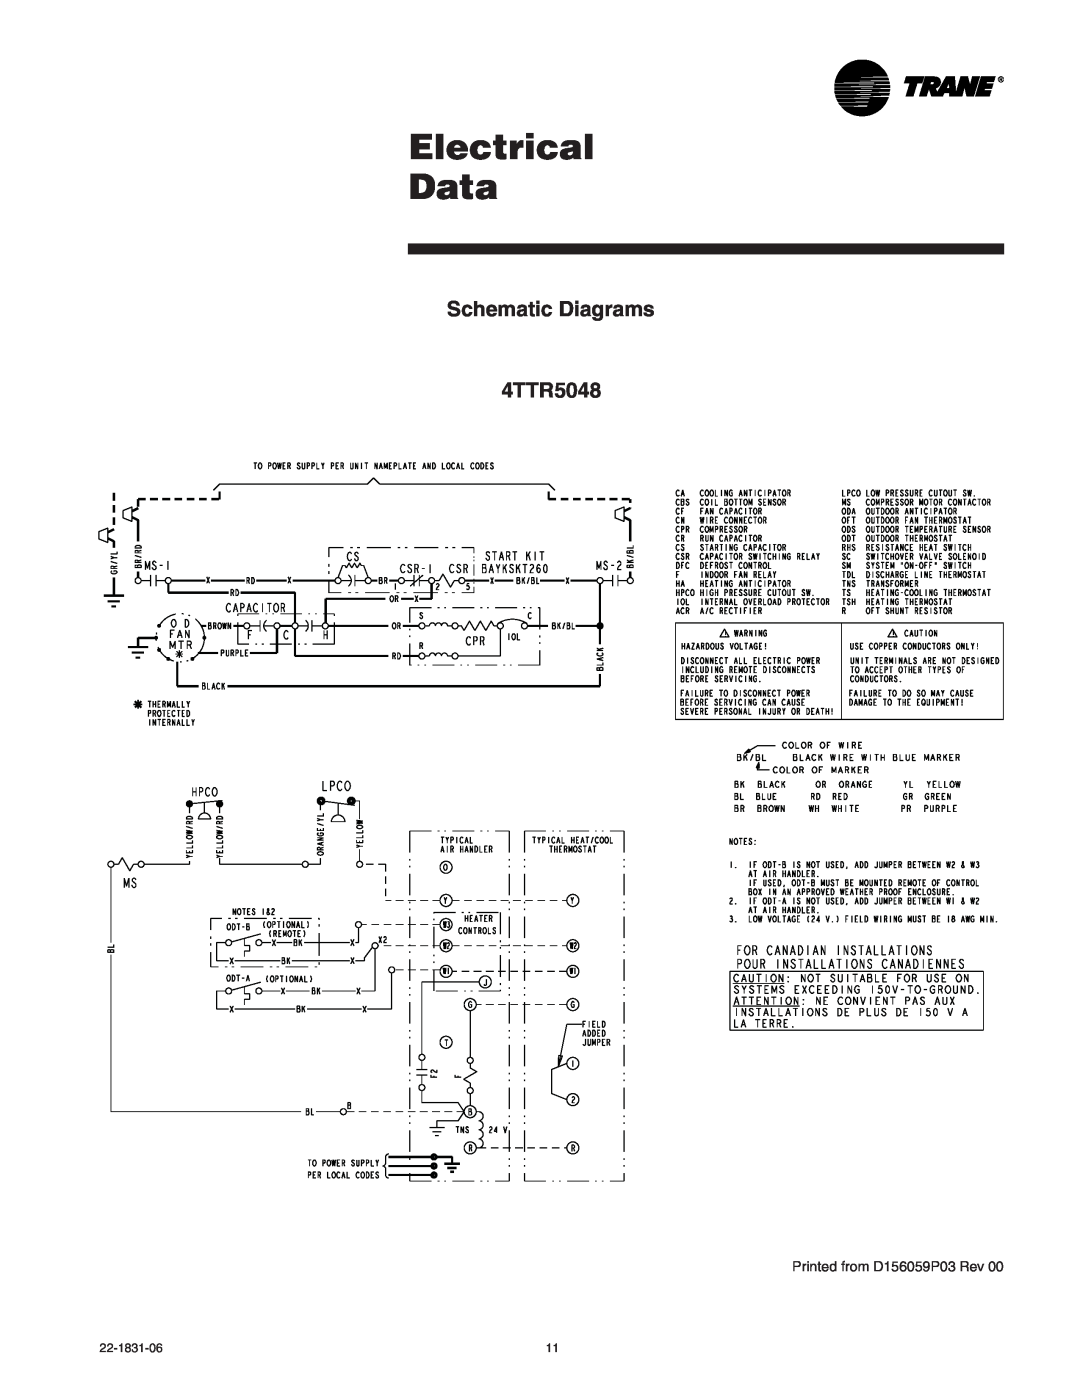 Trane XR15 manual Electrical Data, Schematic Diagrams 4TTR5048, Printed from D156059P03 Rev 